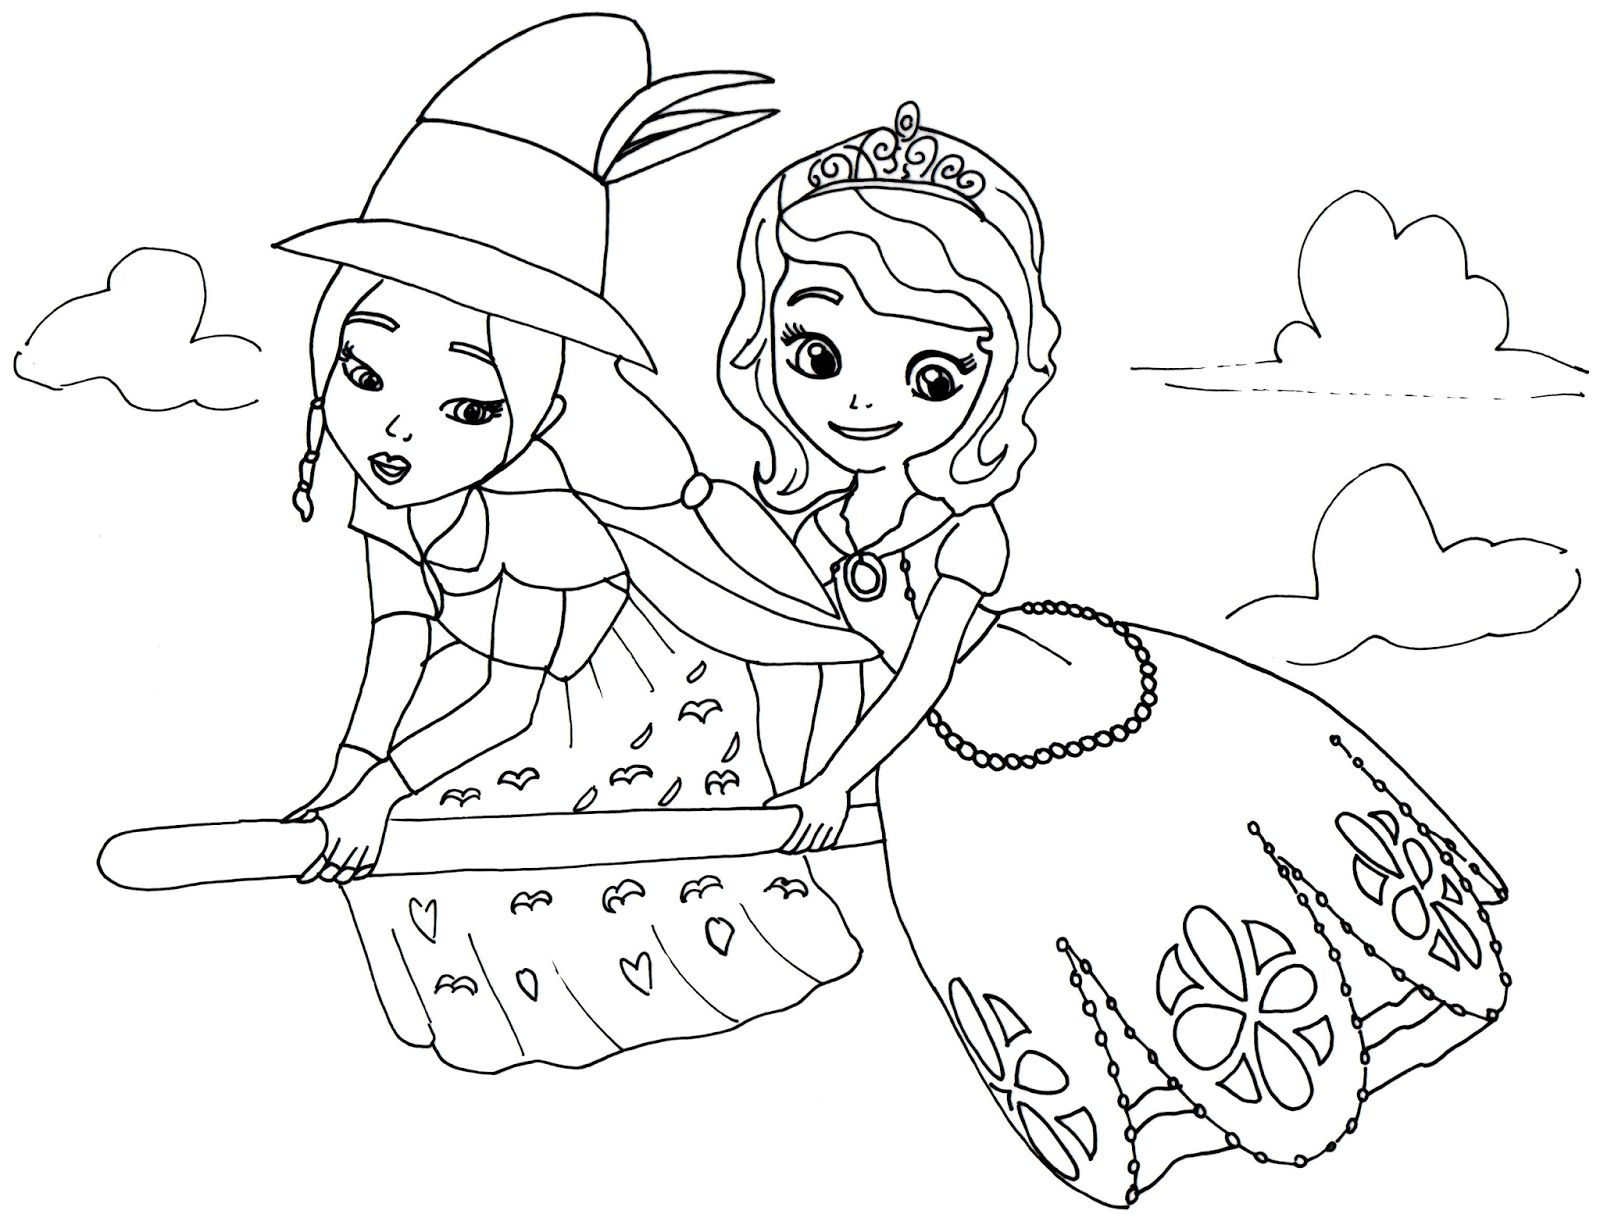 Sofia The First Coloring Pages Lucinda Witch Coloring Pages Disney Princess Coloring